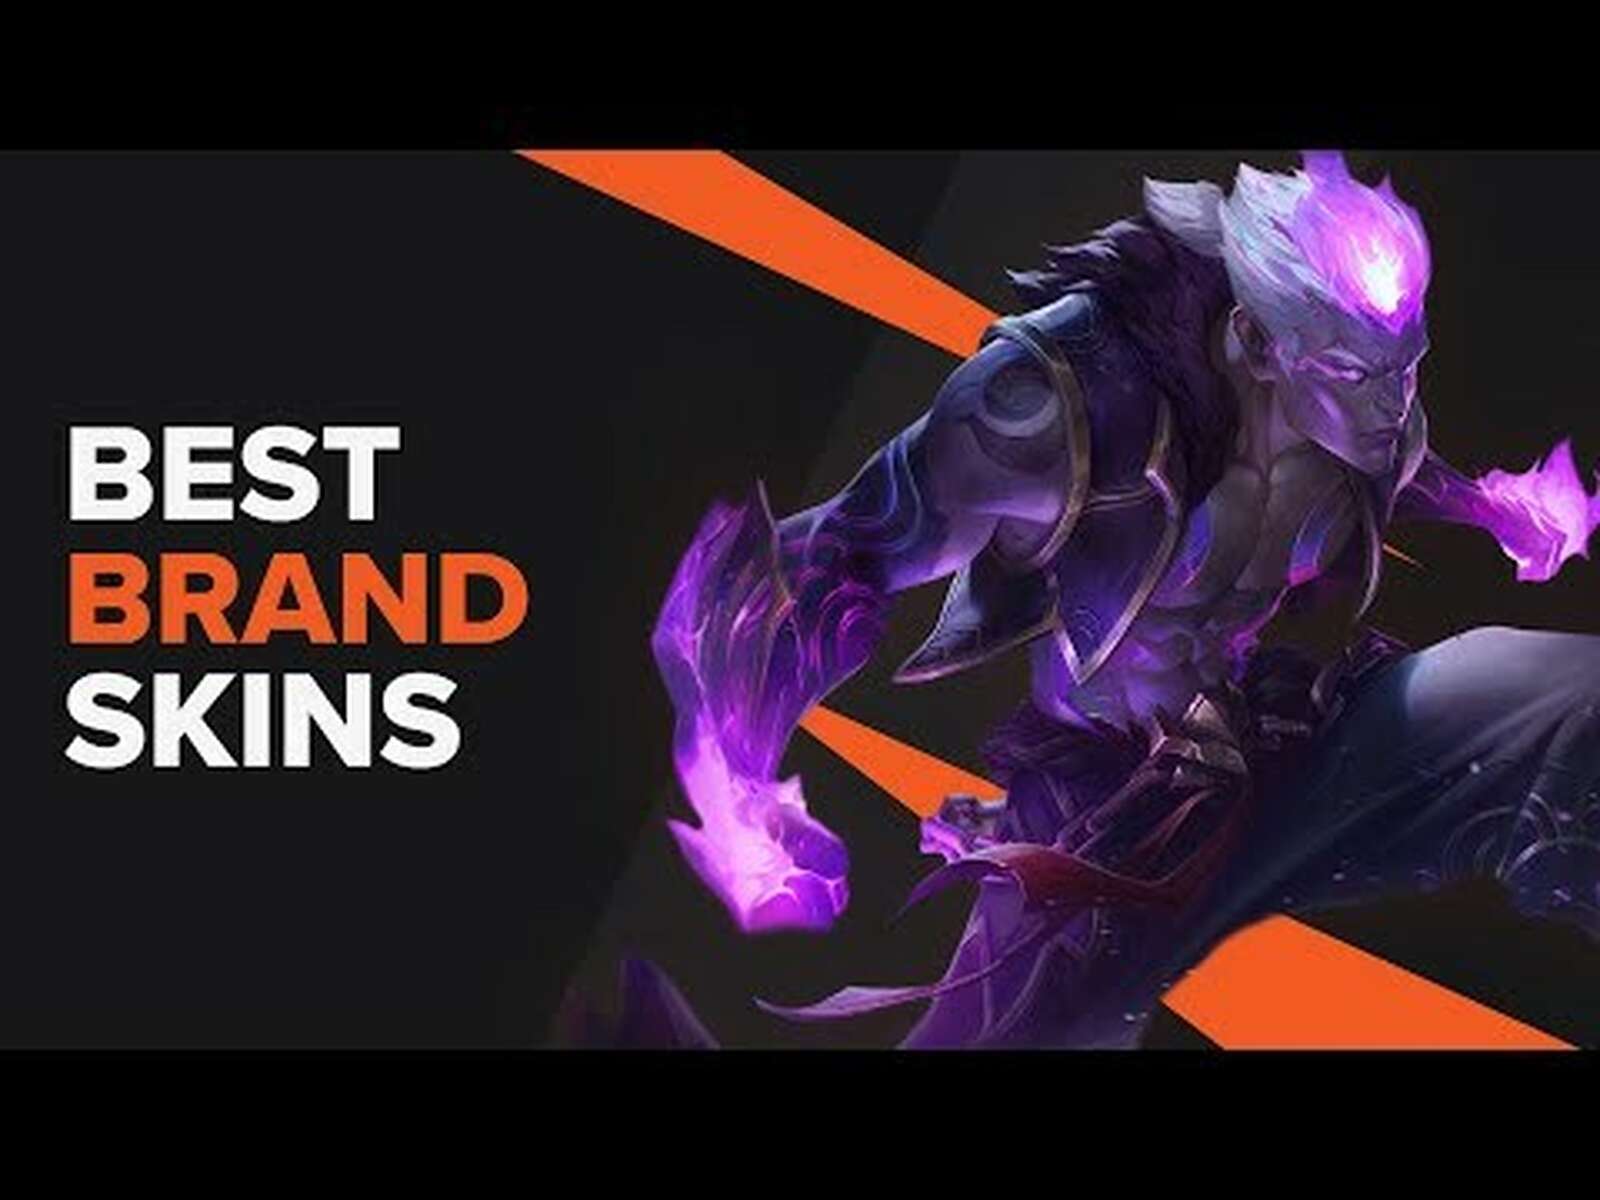 The Best Brand Skins in League of Legends